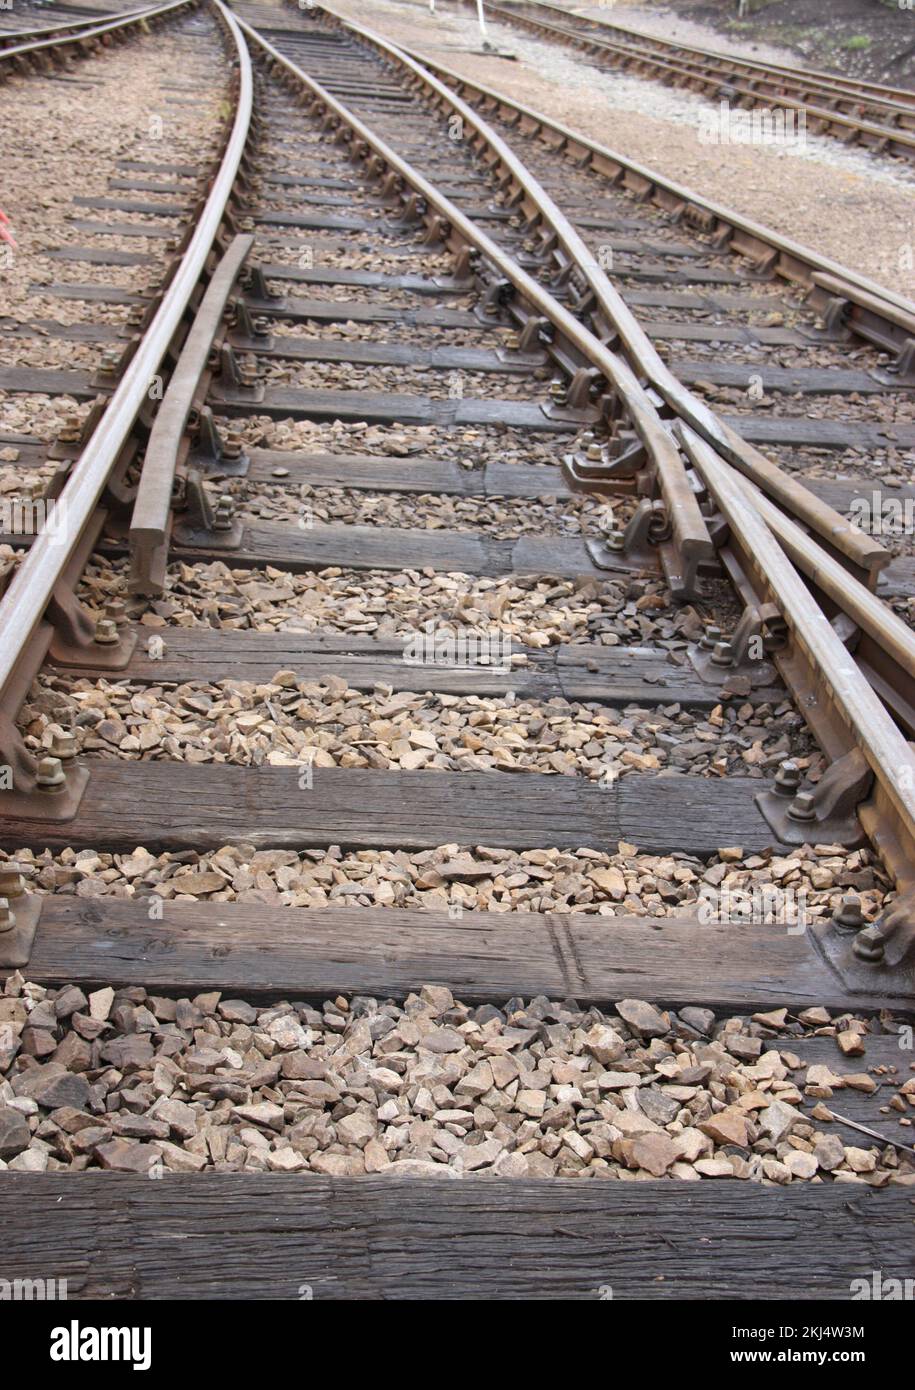 A Set of Points on a Railway Train Track. Stock Photo